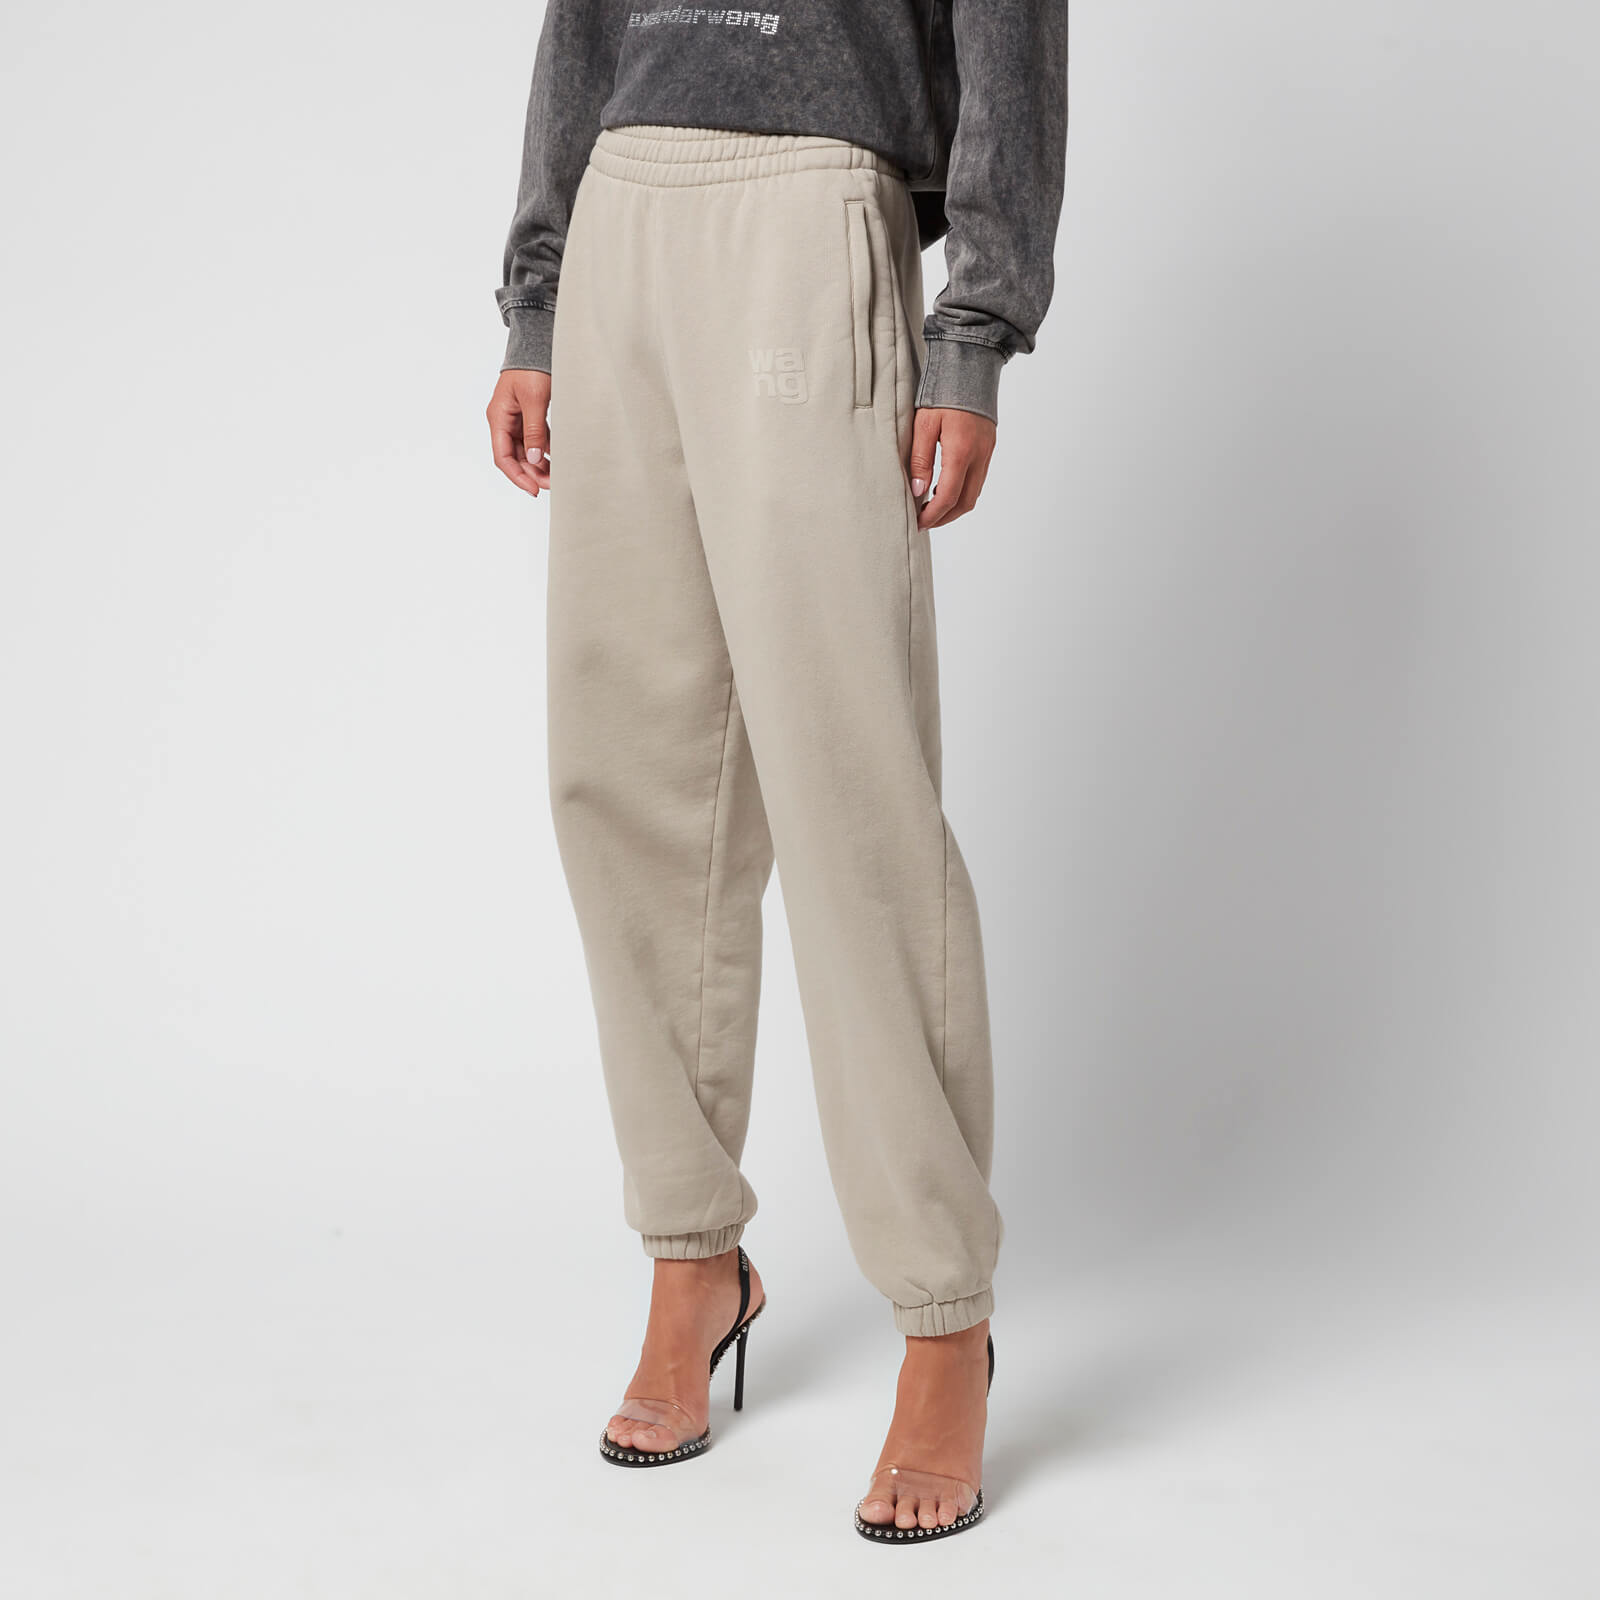 Alexander Wang Women's Structured Terry Classic Sweatpants with Puff Paint - Clay - M